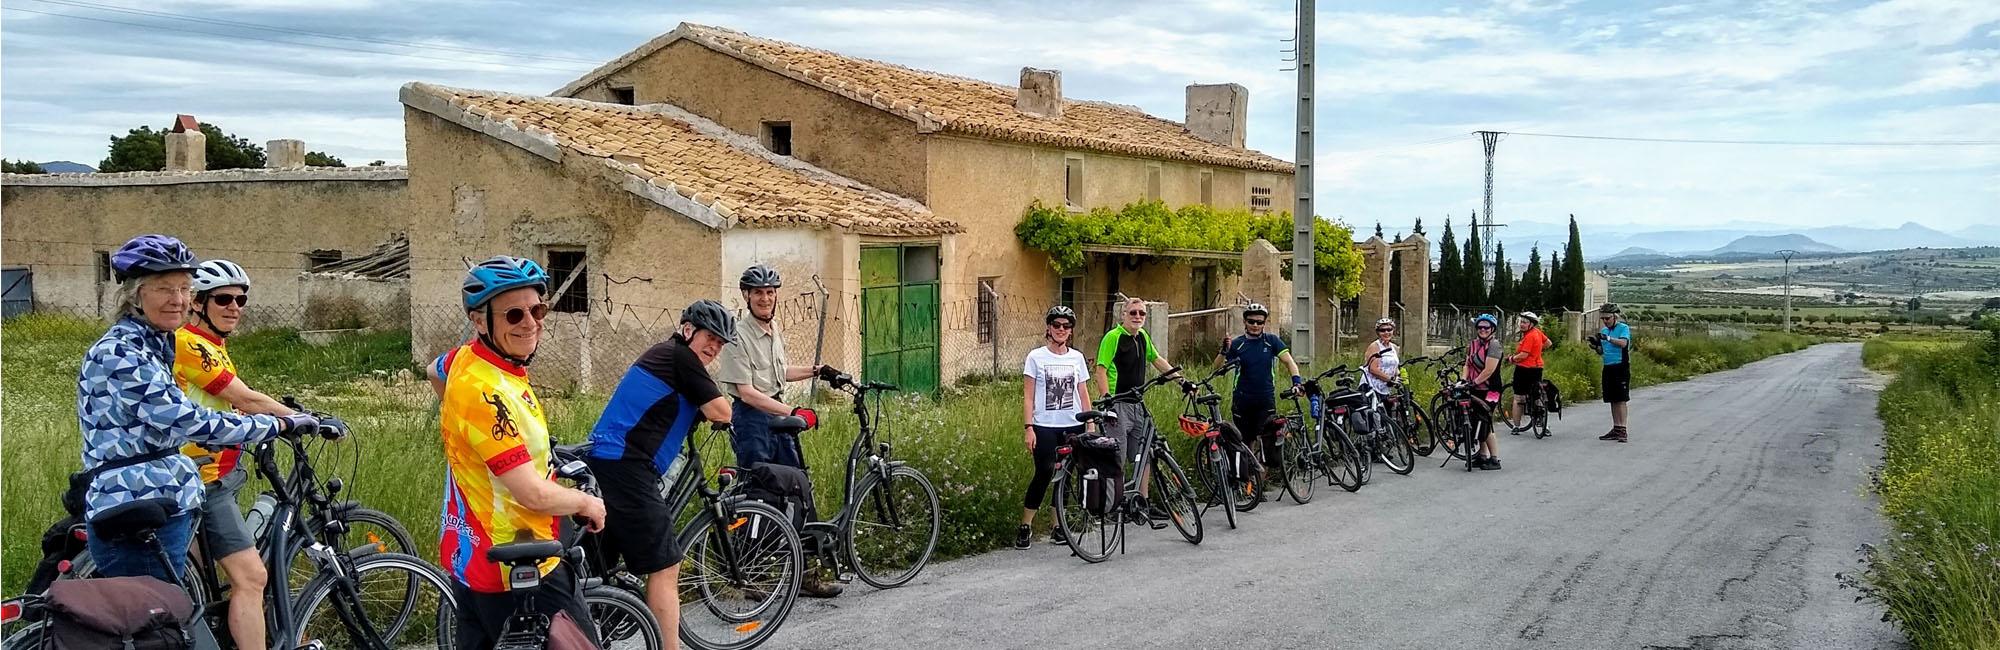 Group of cyclists in Murcia